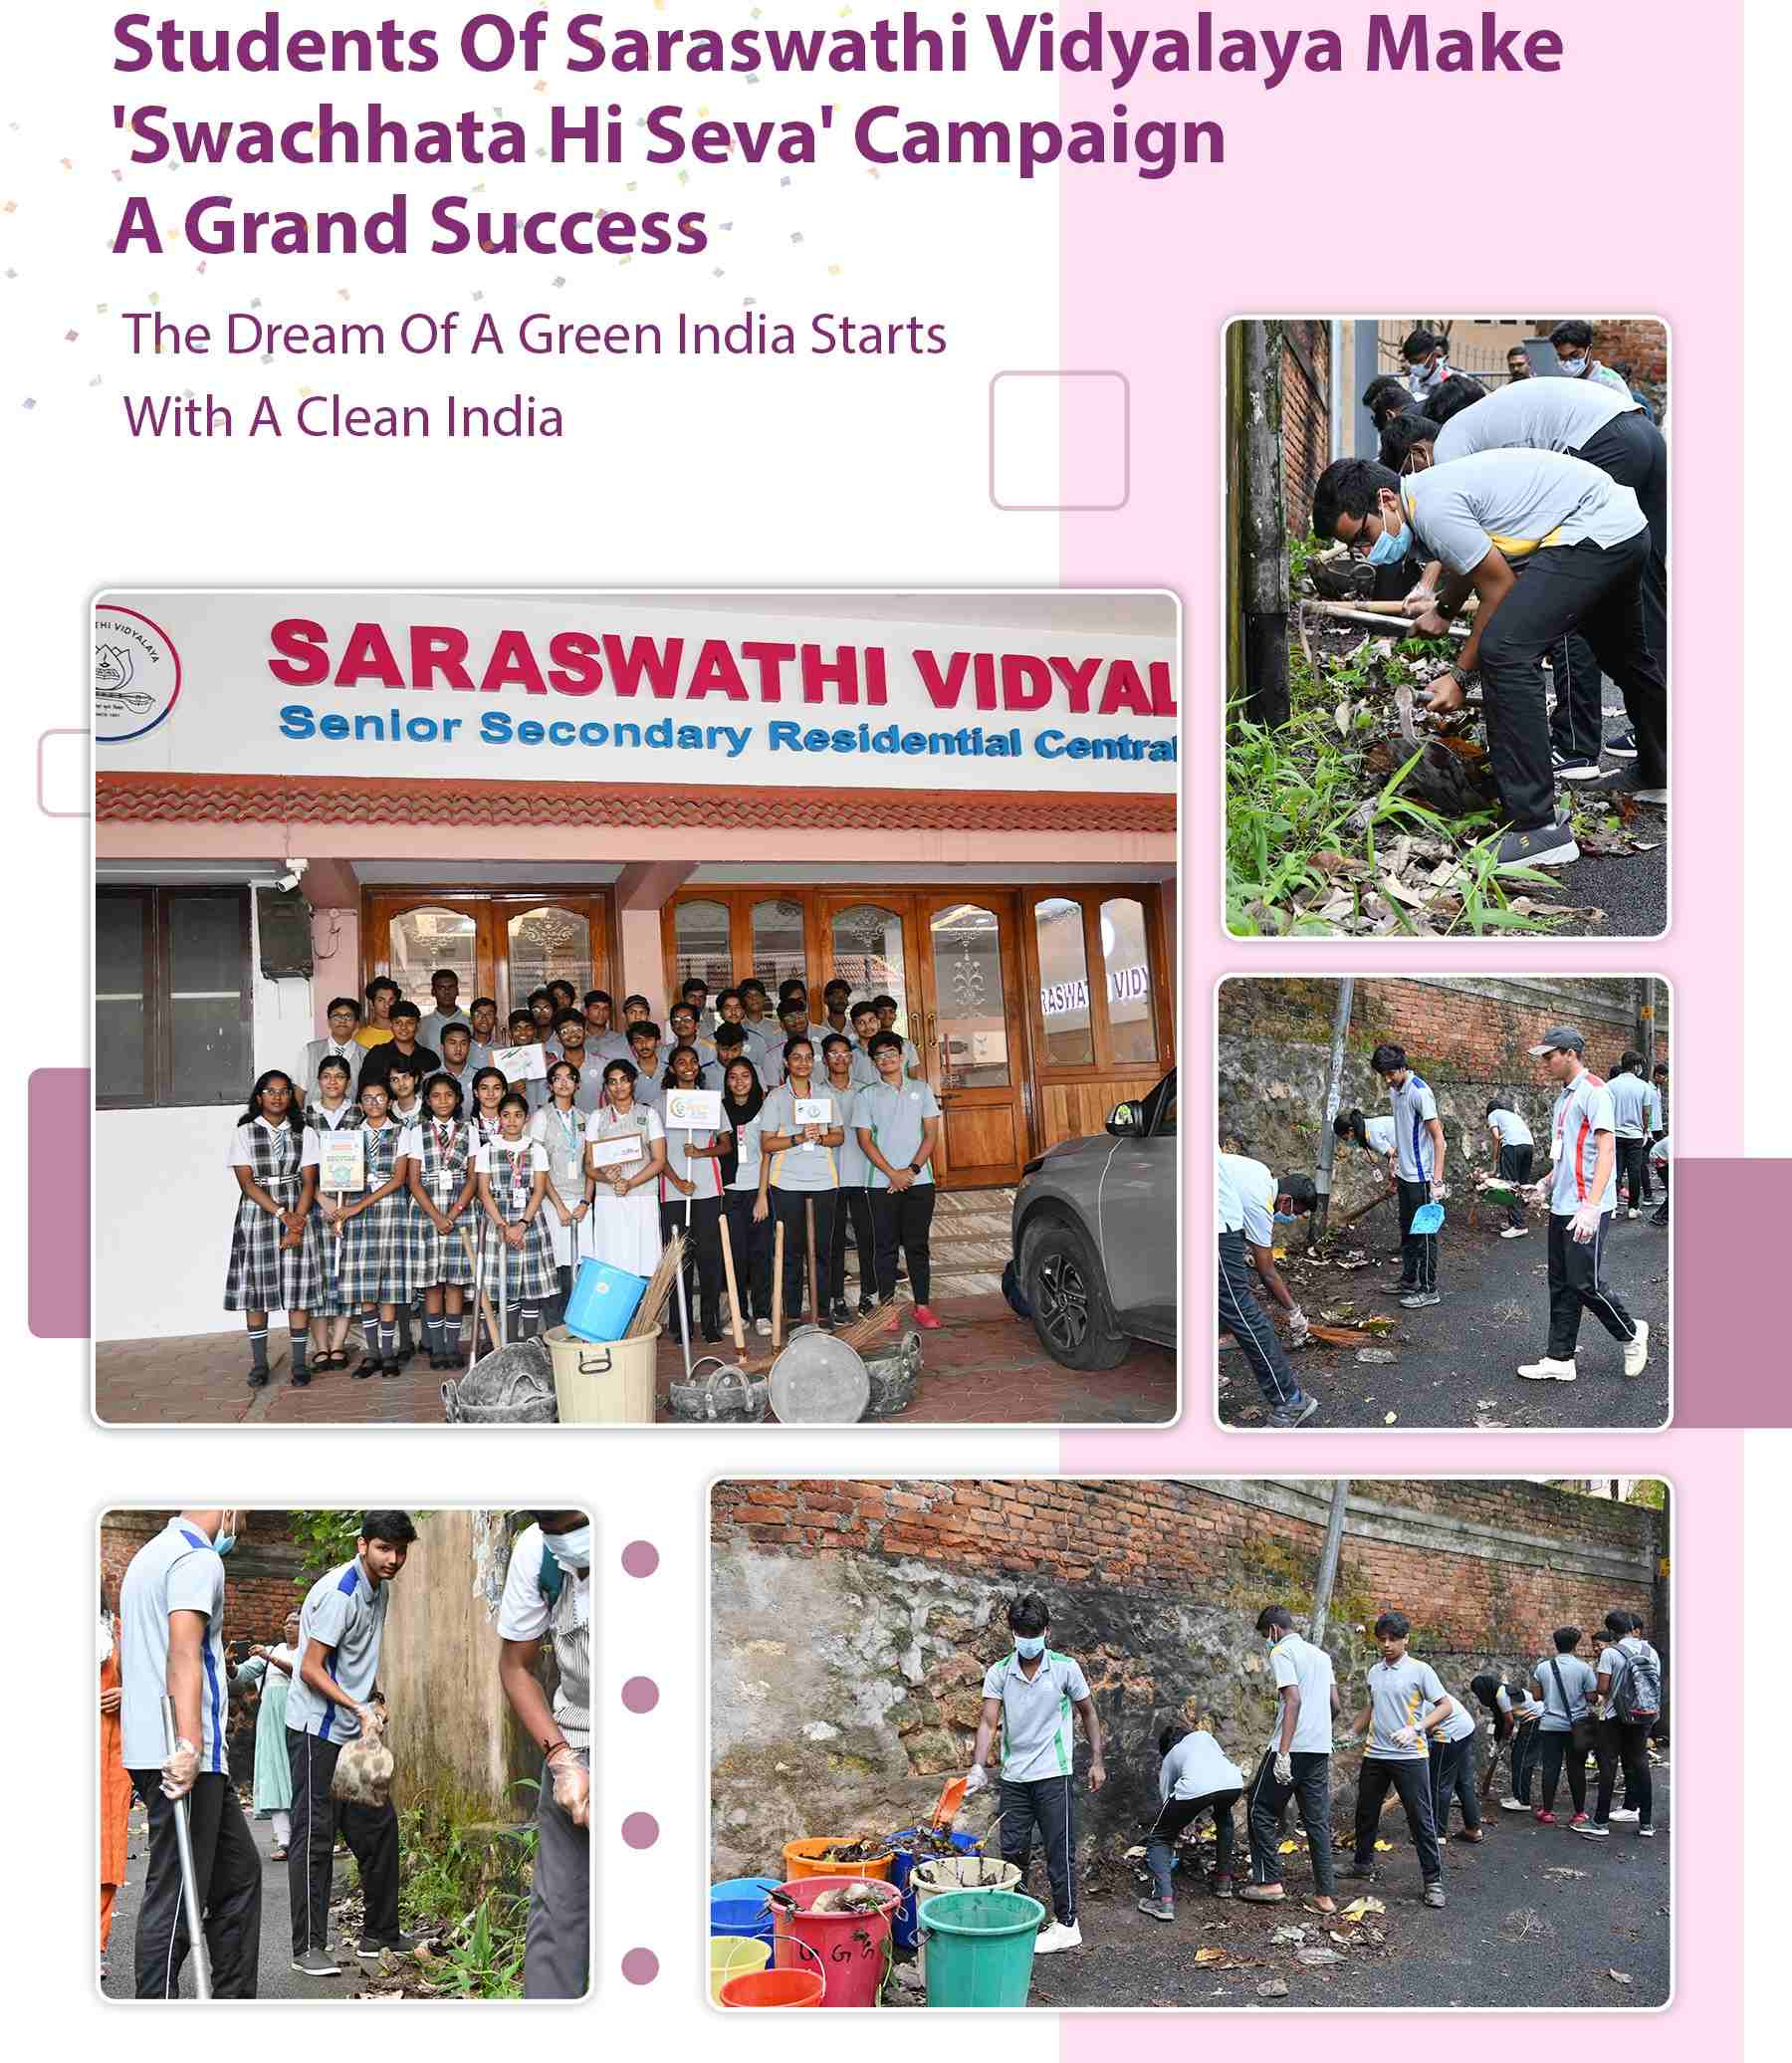 The Dream Of A Green India Starts With A Clean India